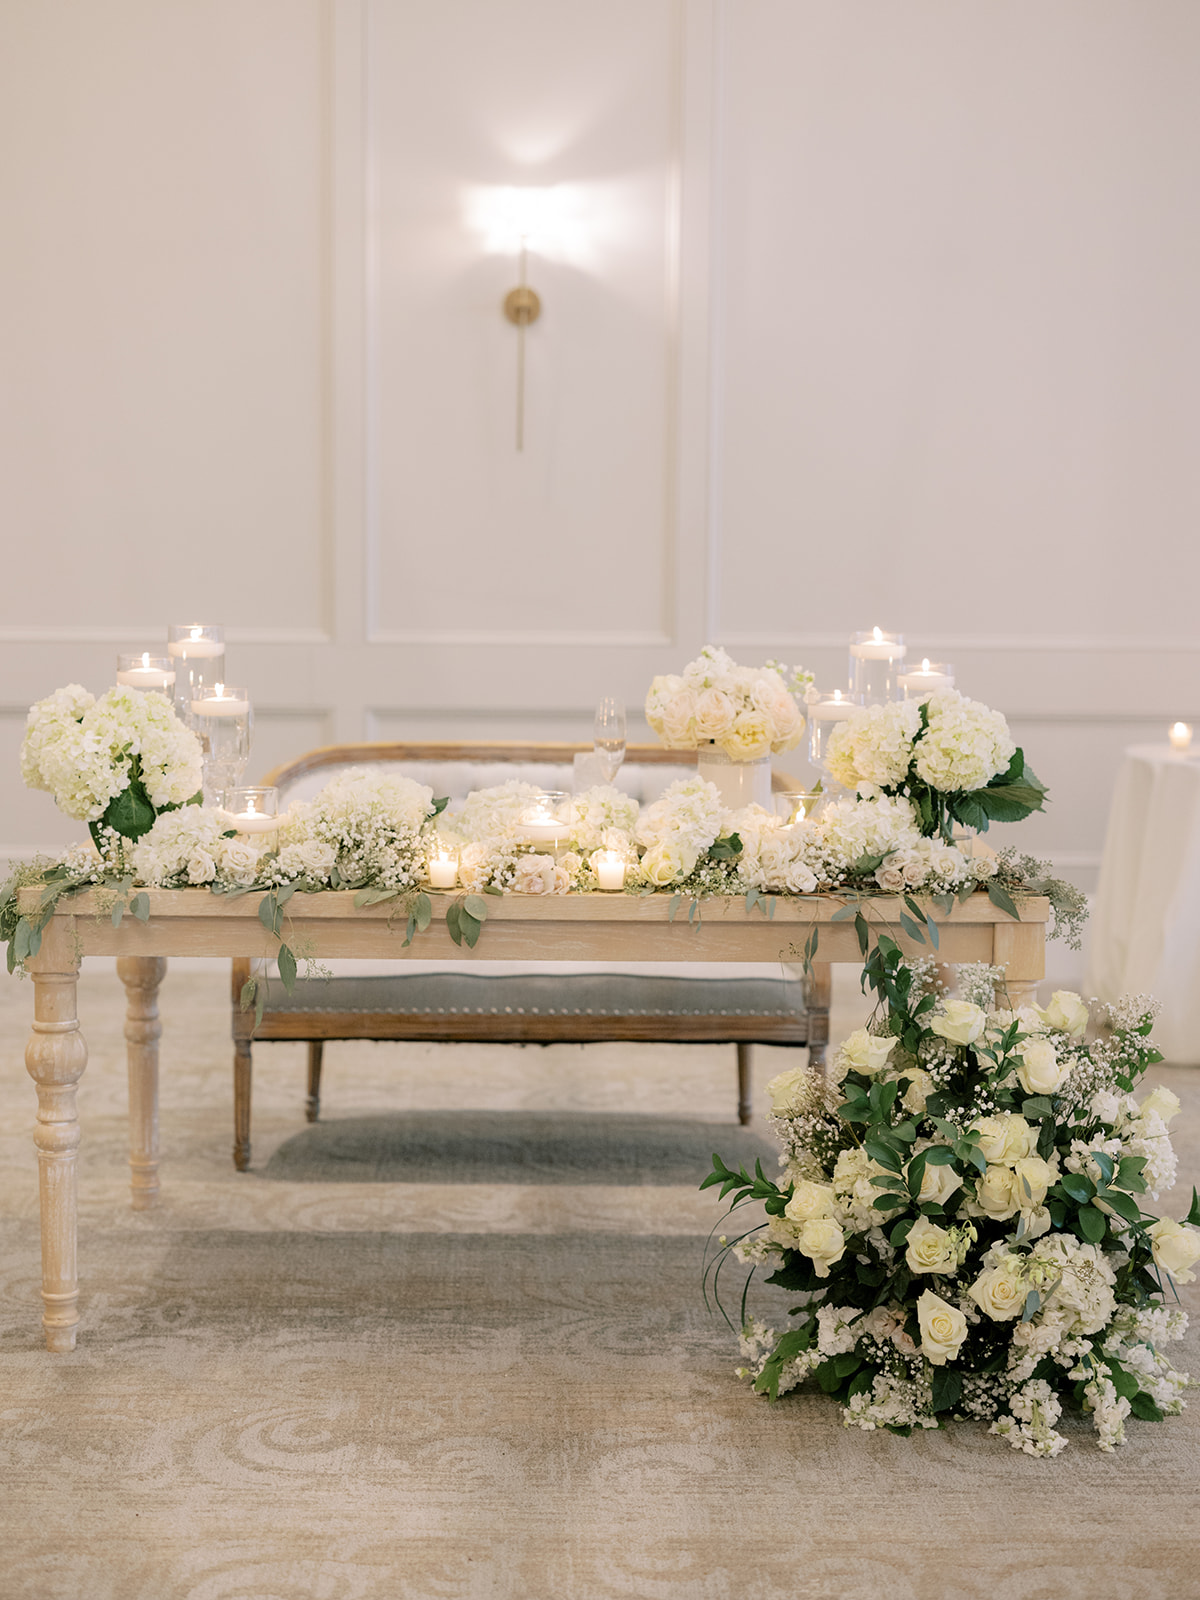 sweetheart table at wedding covered in flowers